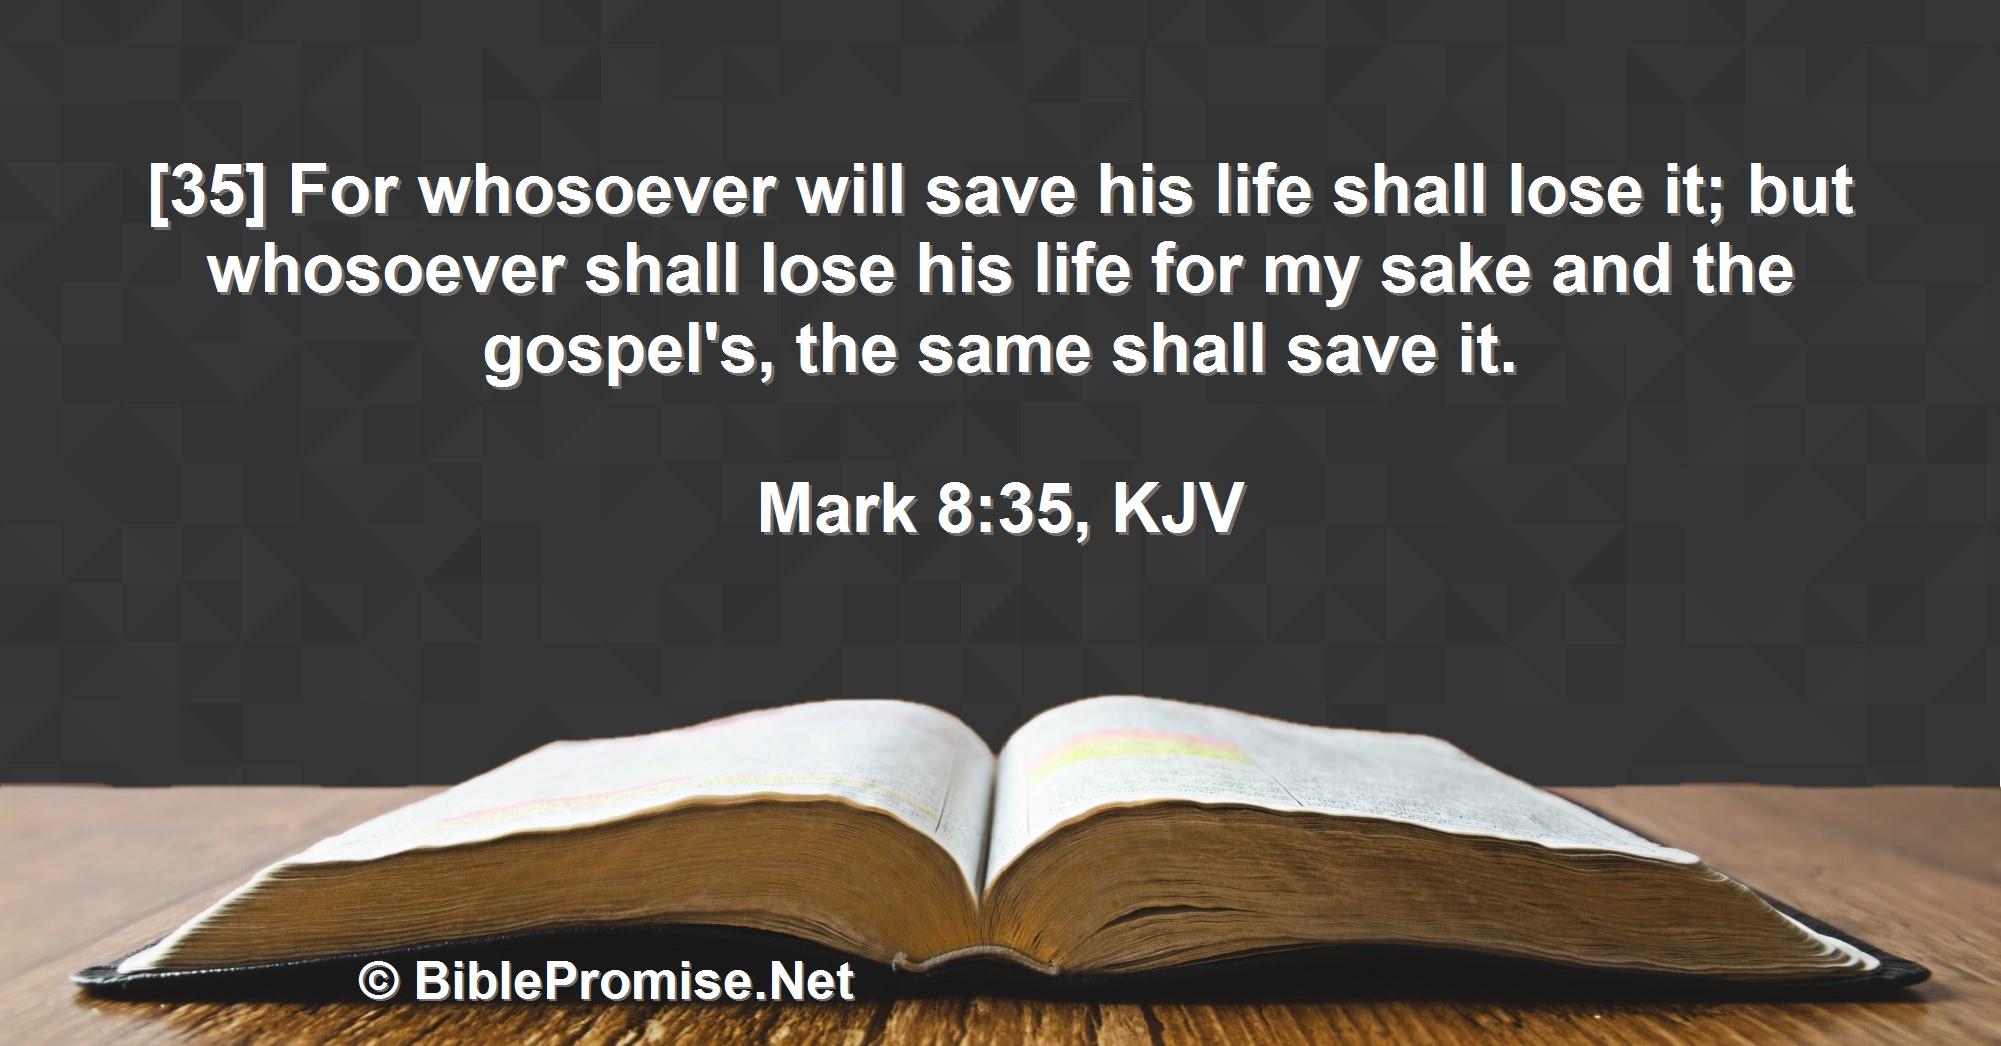 Sunday, July 31, 2022 - Mark 8:35 (KJV) - Bible promise that whosoever shall lose his life for my sake and the gospel's, the same shall save it.